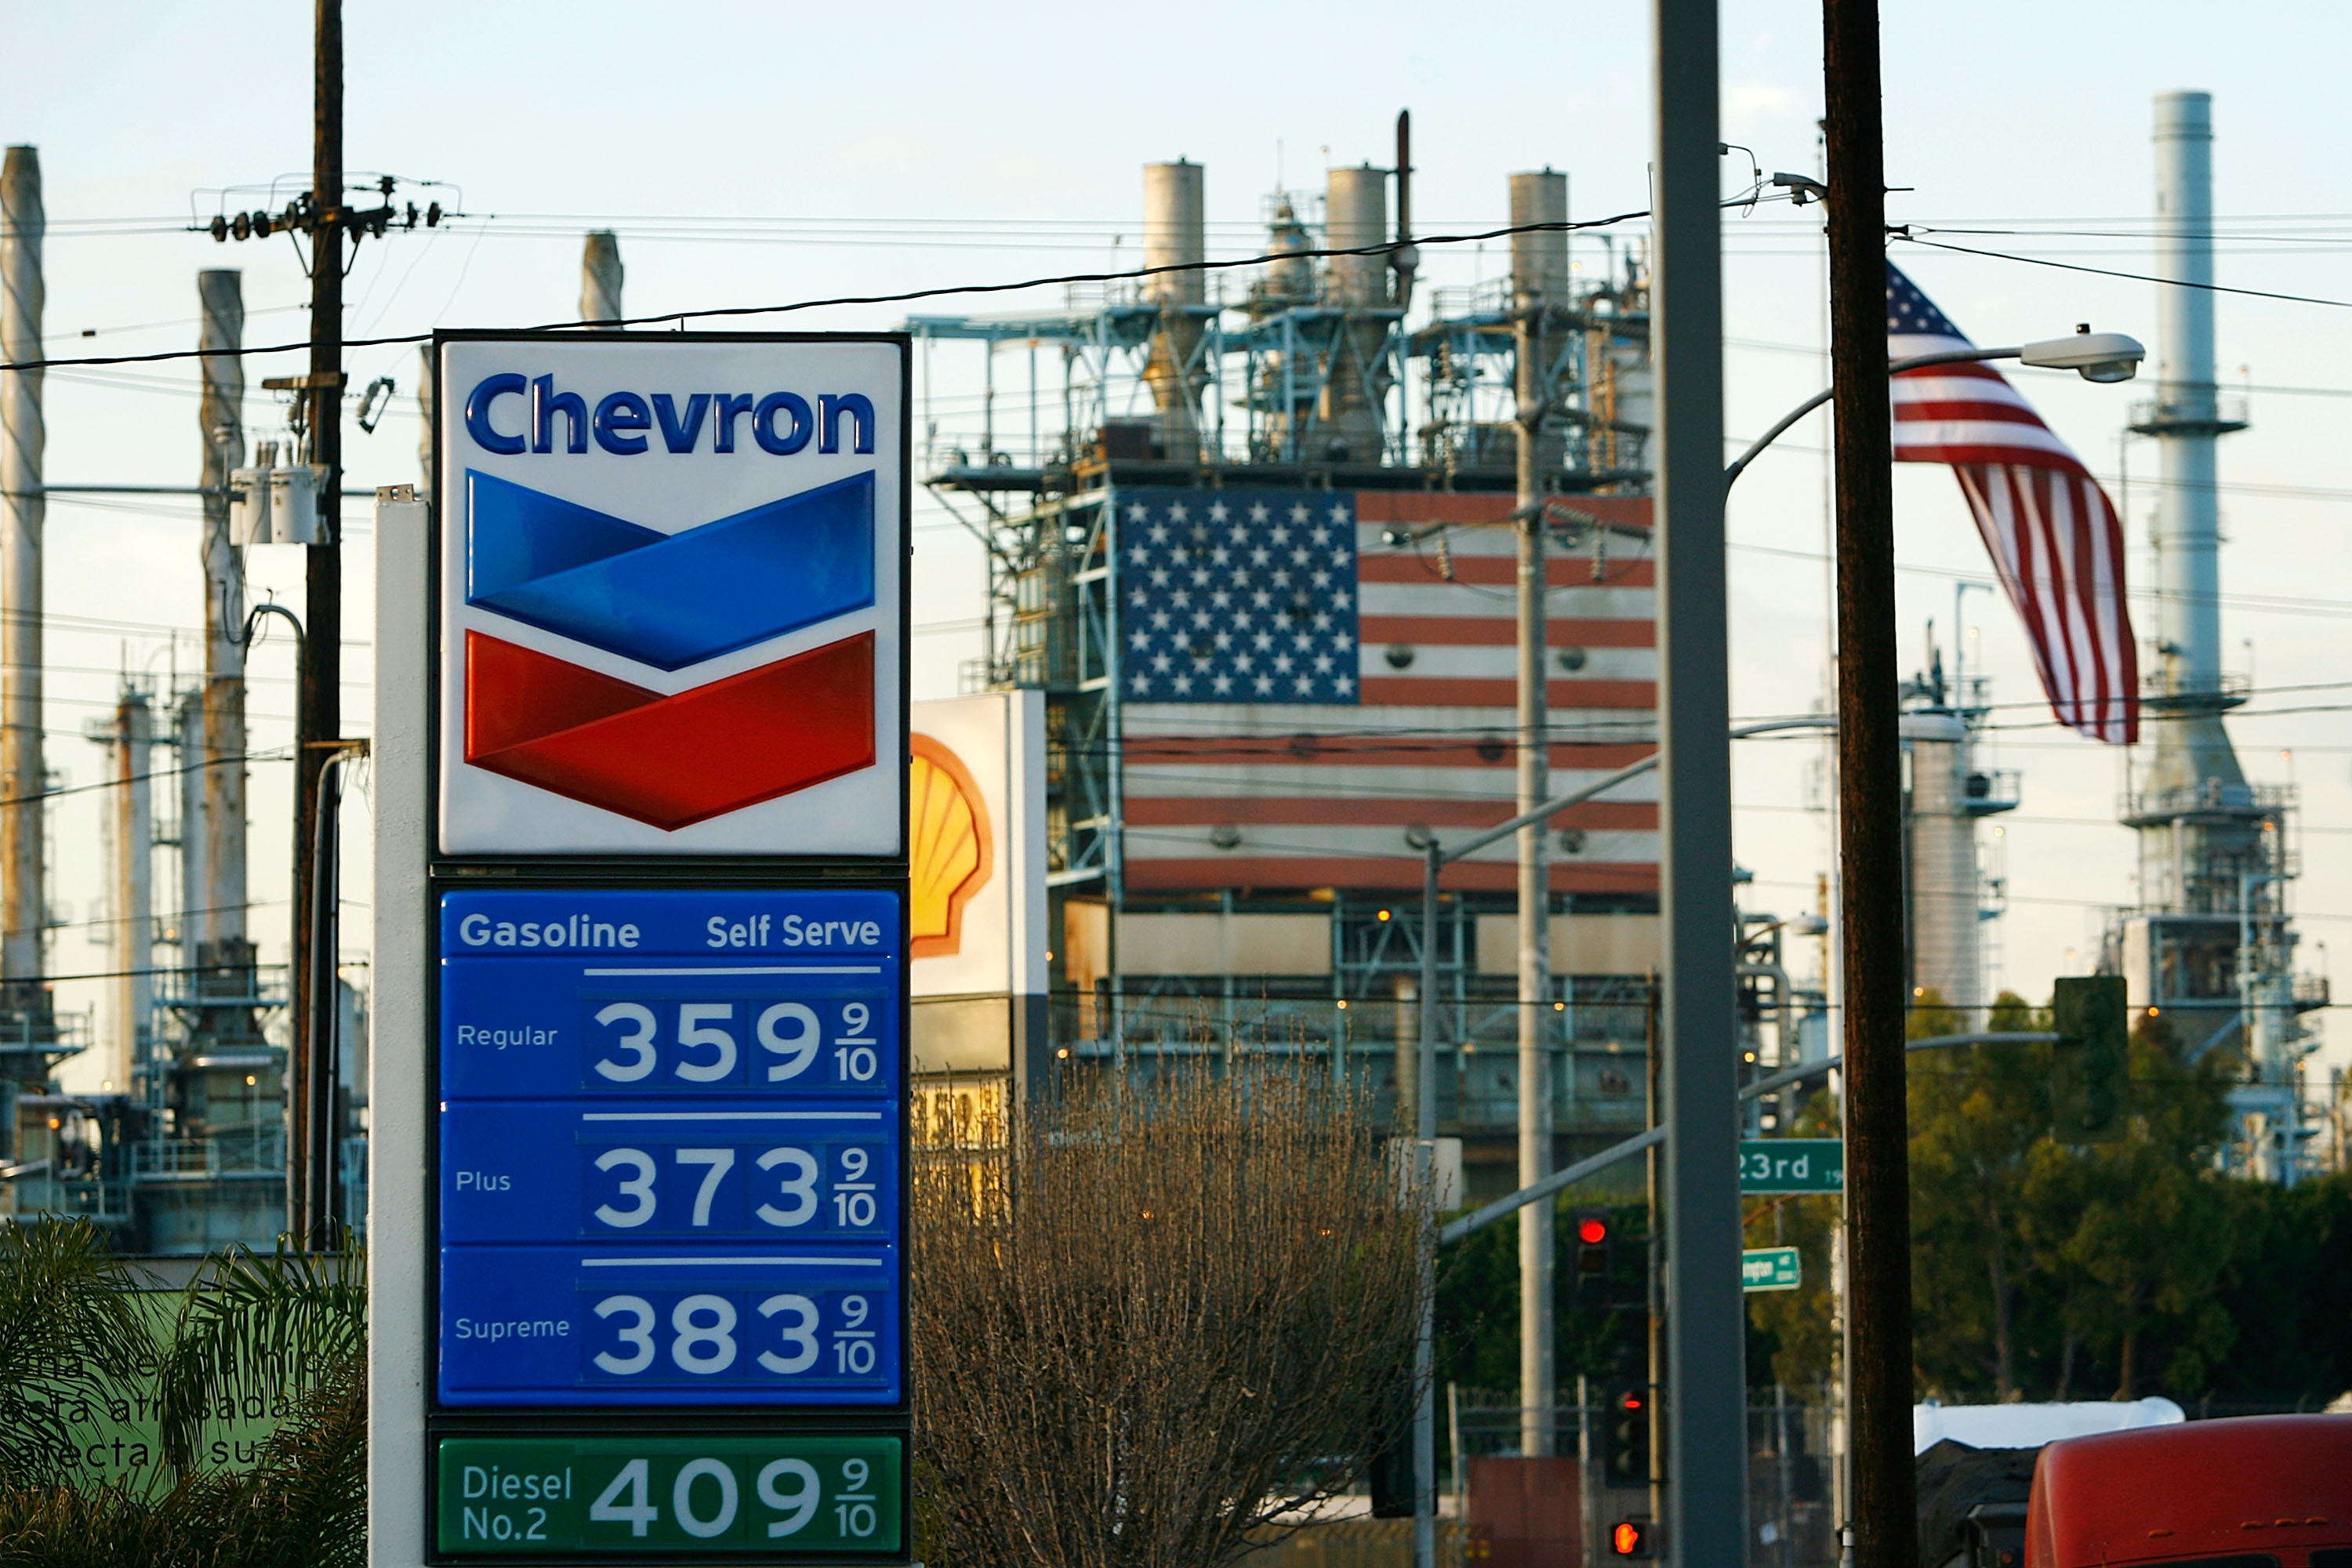 A gas station near the British Petroleum (BP) Arco Wilmington refinery advertises its gas prices after oil hits another new record at $109 a barrel on March 11, 2008 in Wilmington, California. (David McNew—Getty Images)